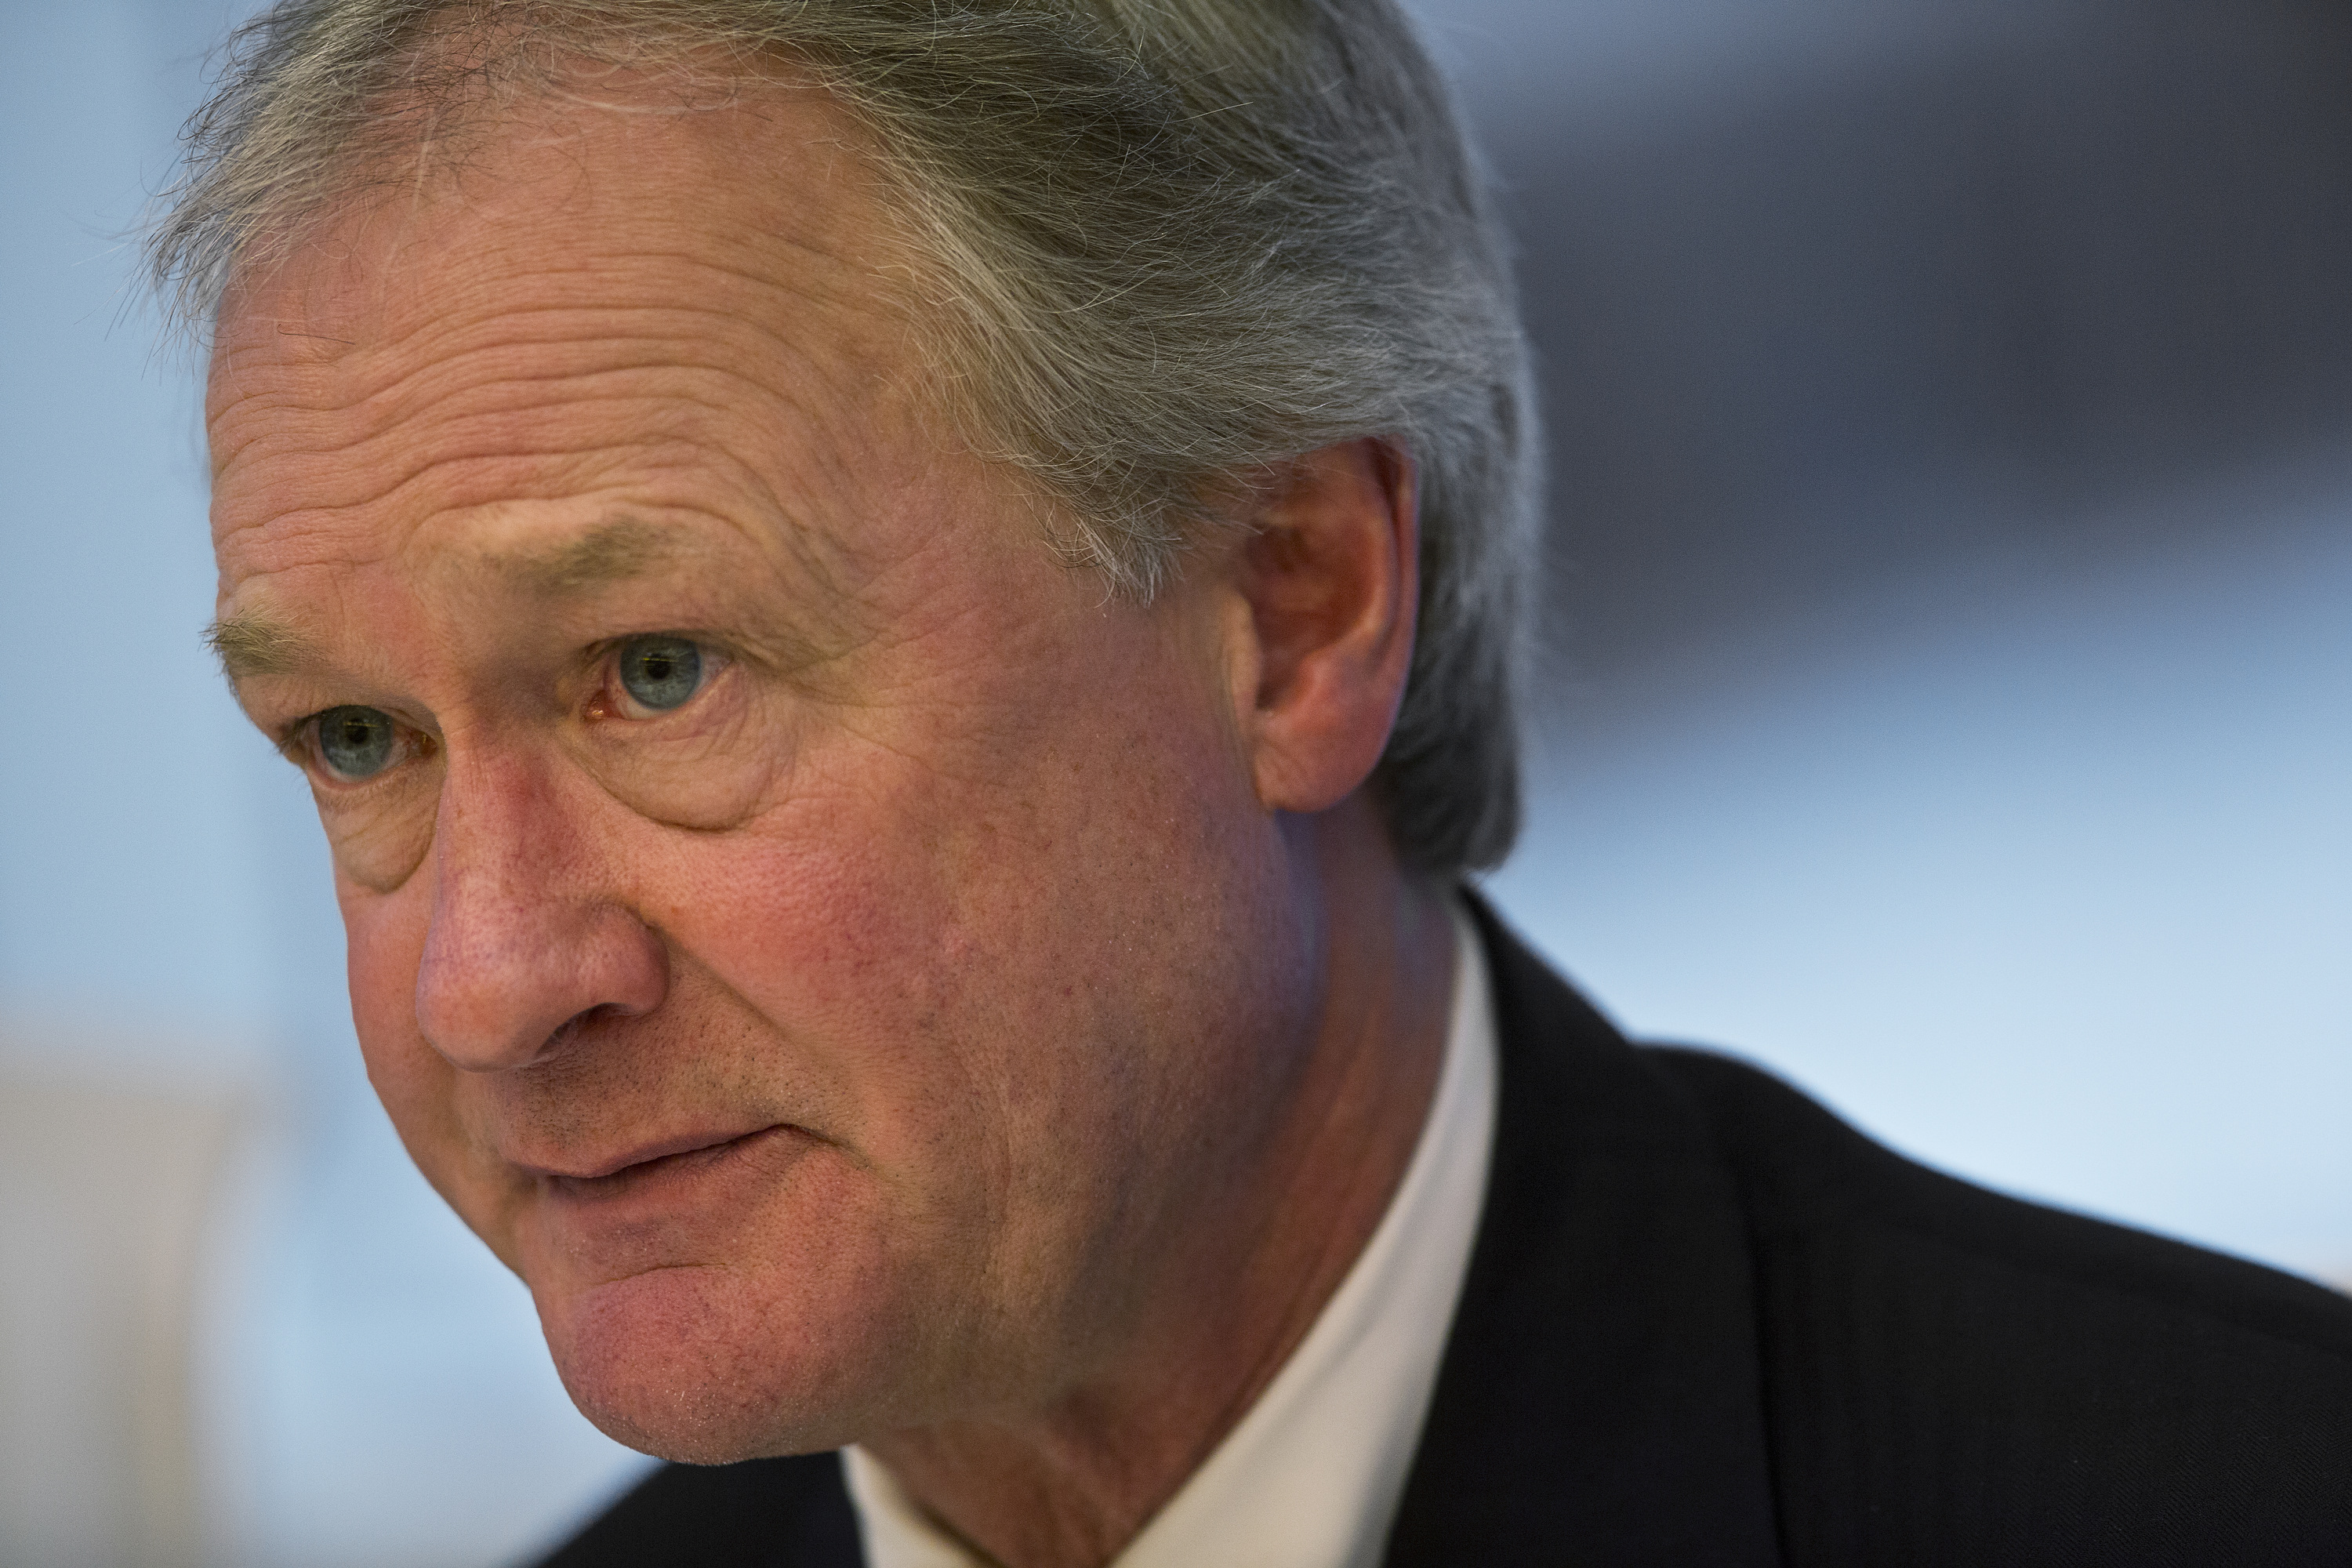 Lincoln Chafee, governor of Rhode Island, speaks during an interview in New York, U.S., on Monday, April 29, 2013. (Bloomberg—Bloomberg via Getty Images)